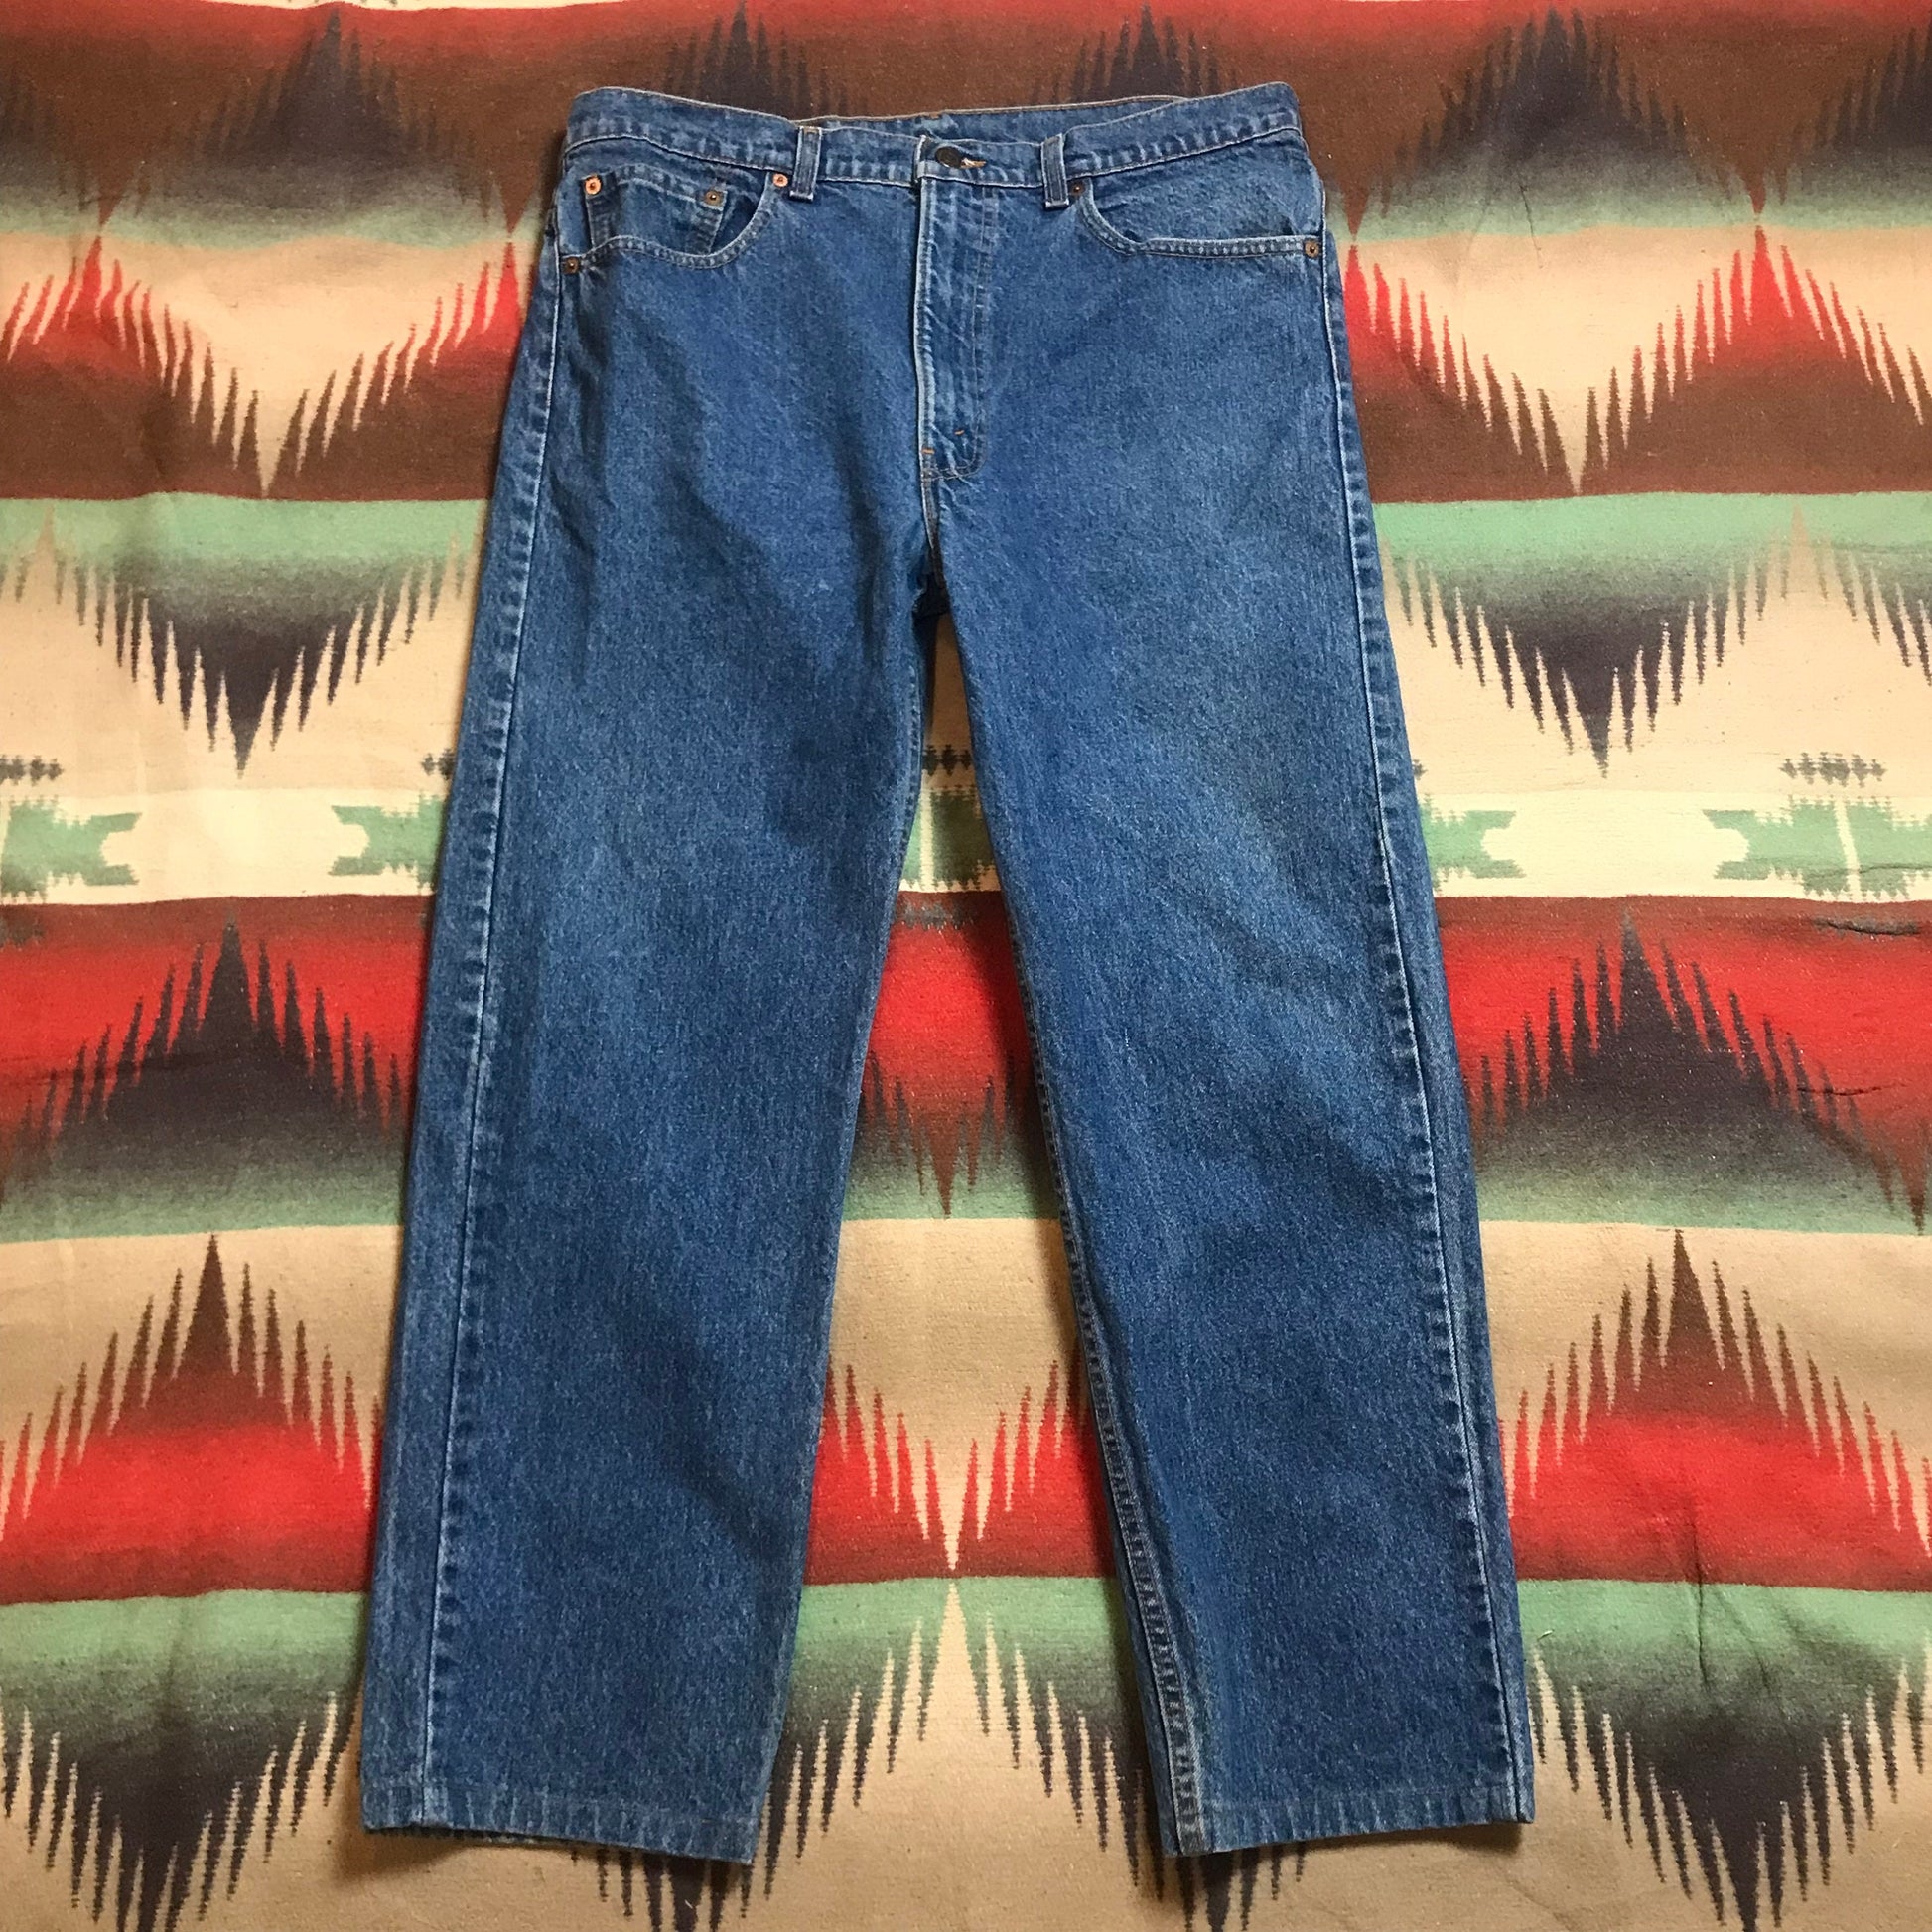 1980s Levi's 505 Jeans Made in USA Size 36x28 – People's Champ Vintage